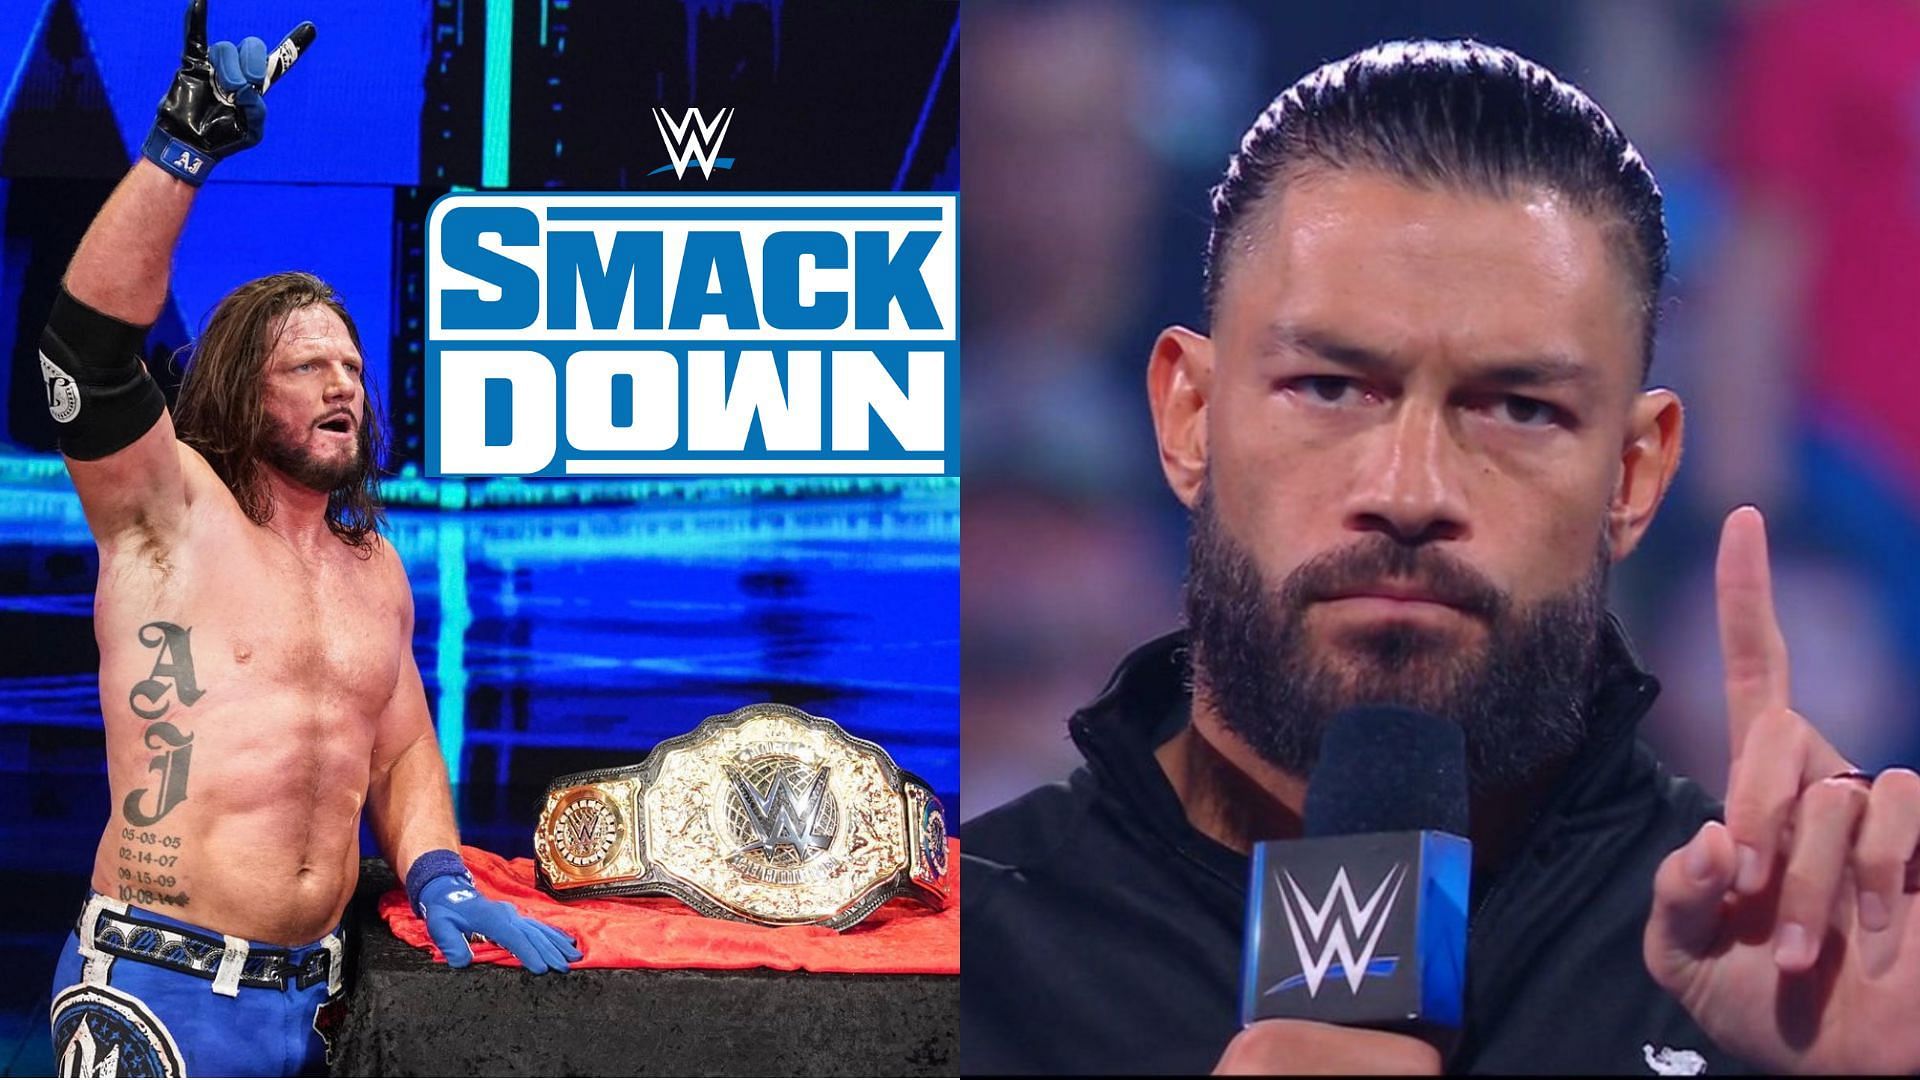 WWE SmackDown tonight was a stacked show